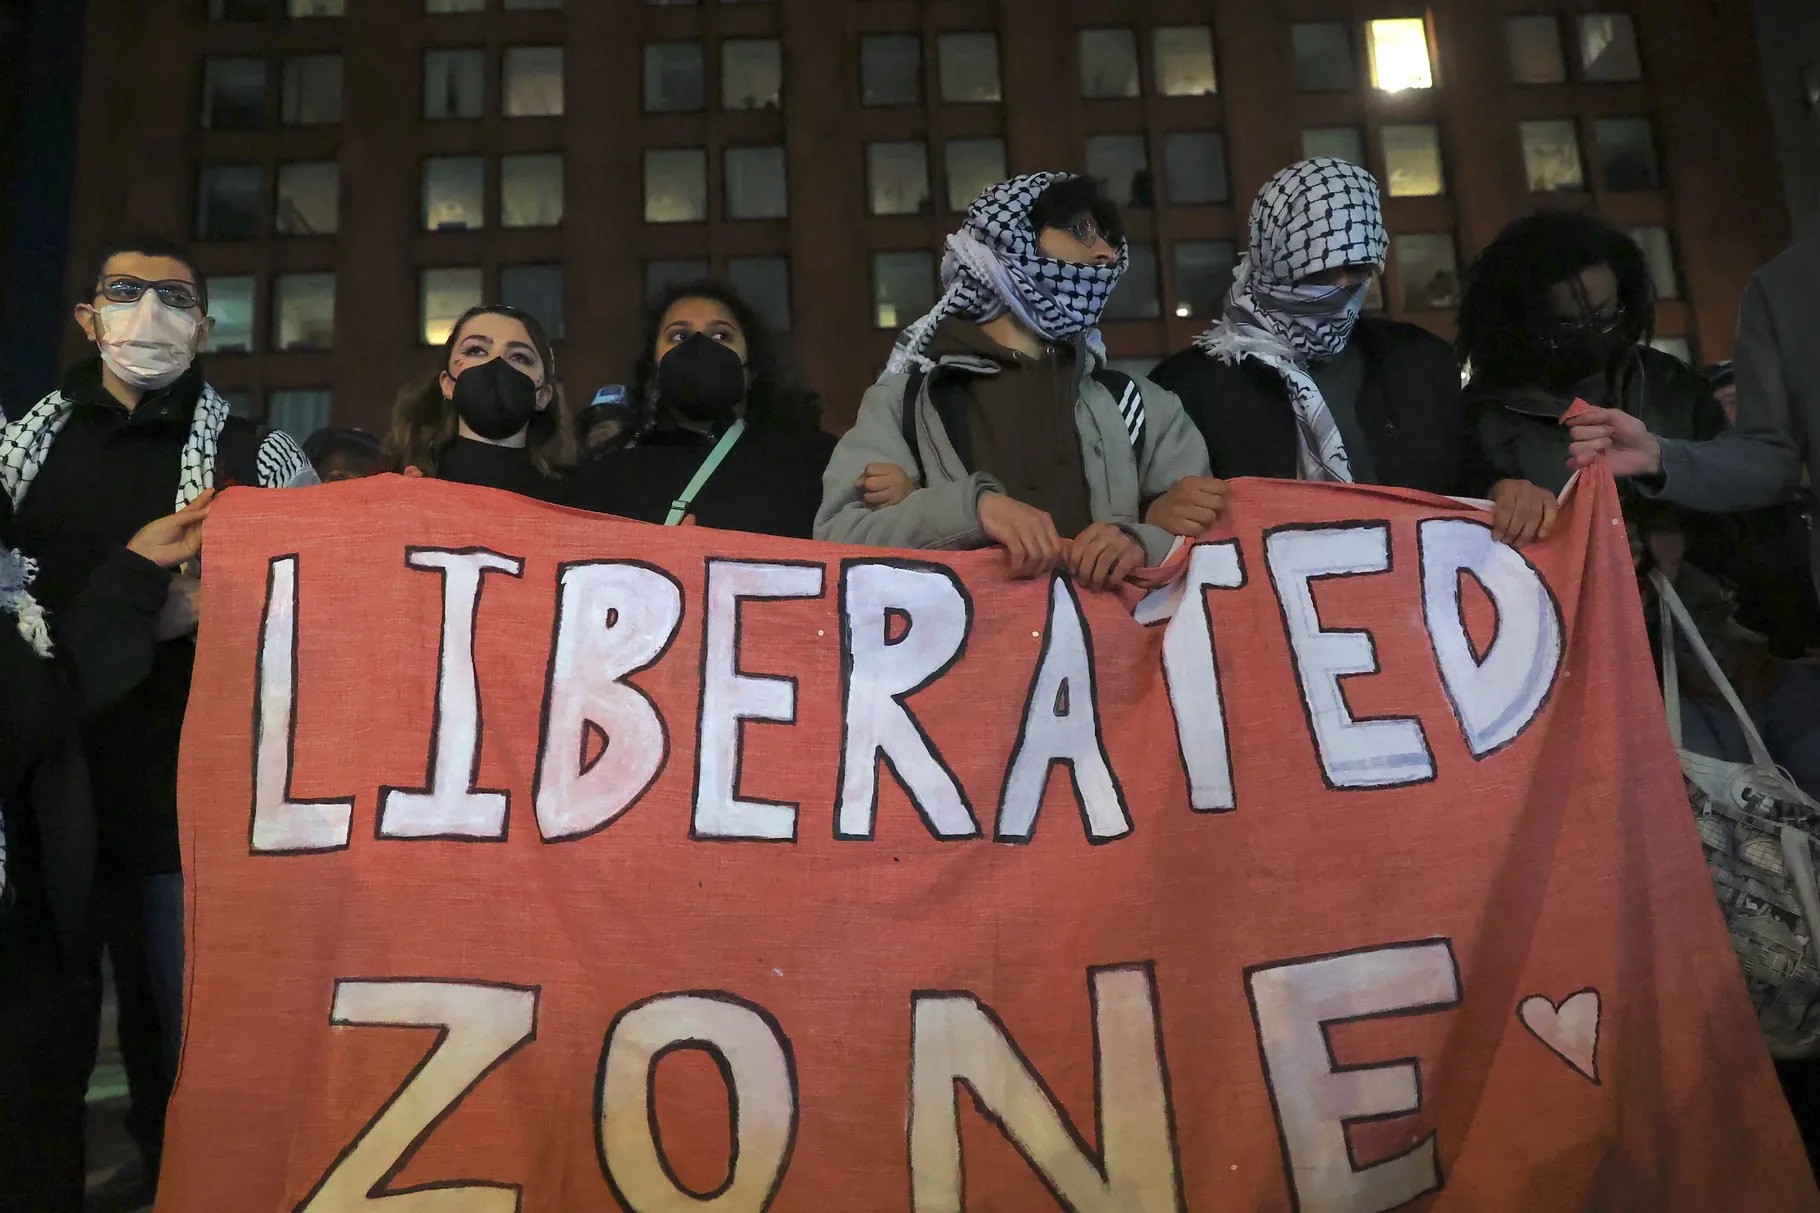 Five masked pro-Palestine protesters hold up a sign that reads "Liberated Zone"